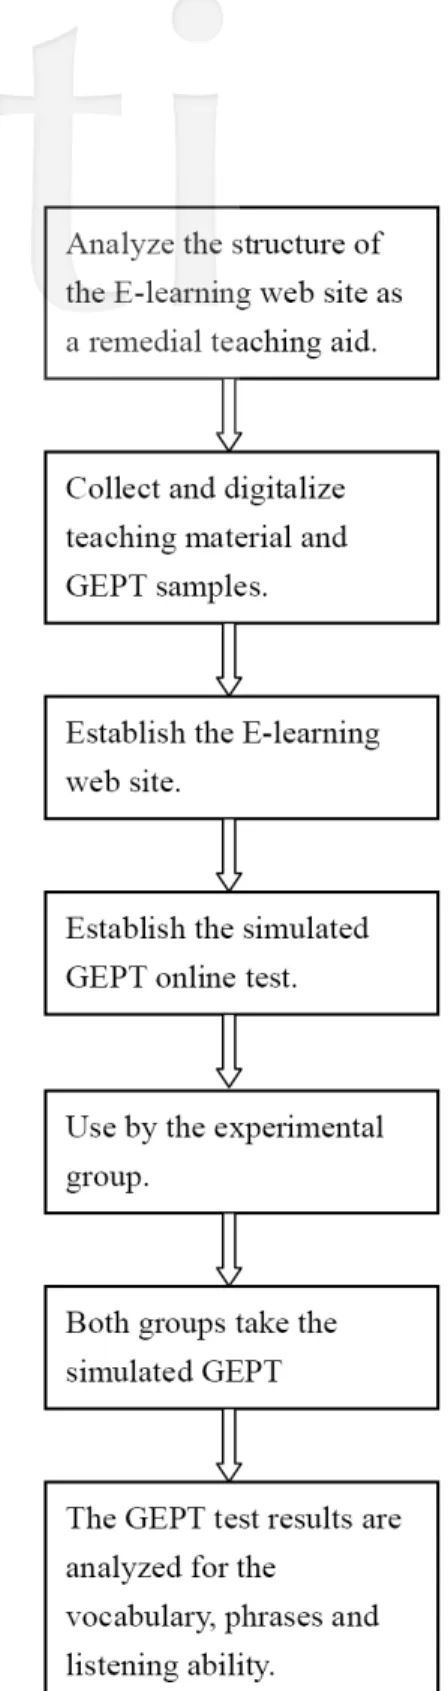 Figure 1. Flow chart for the development and testing of the E-learning web site 